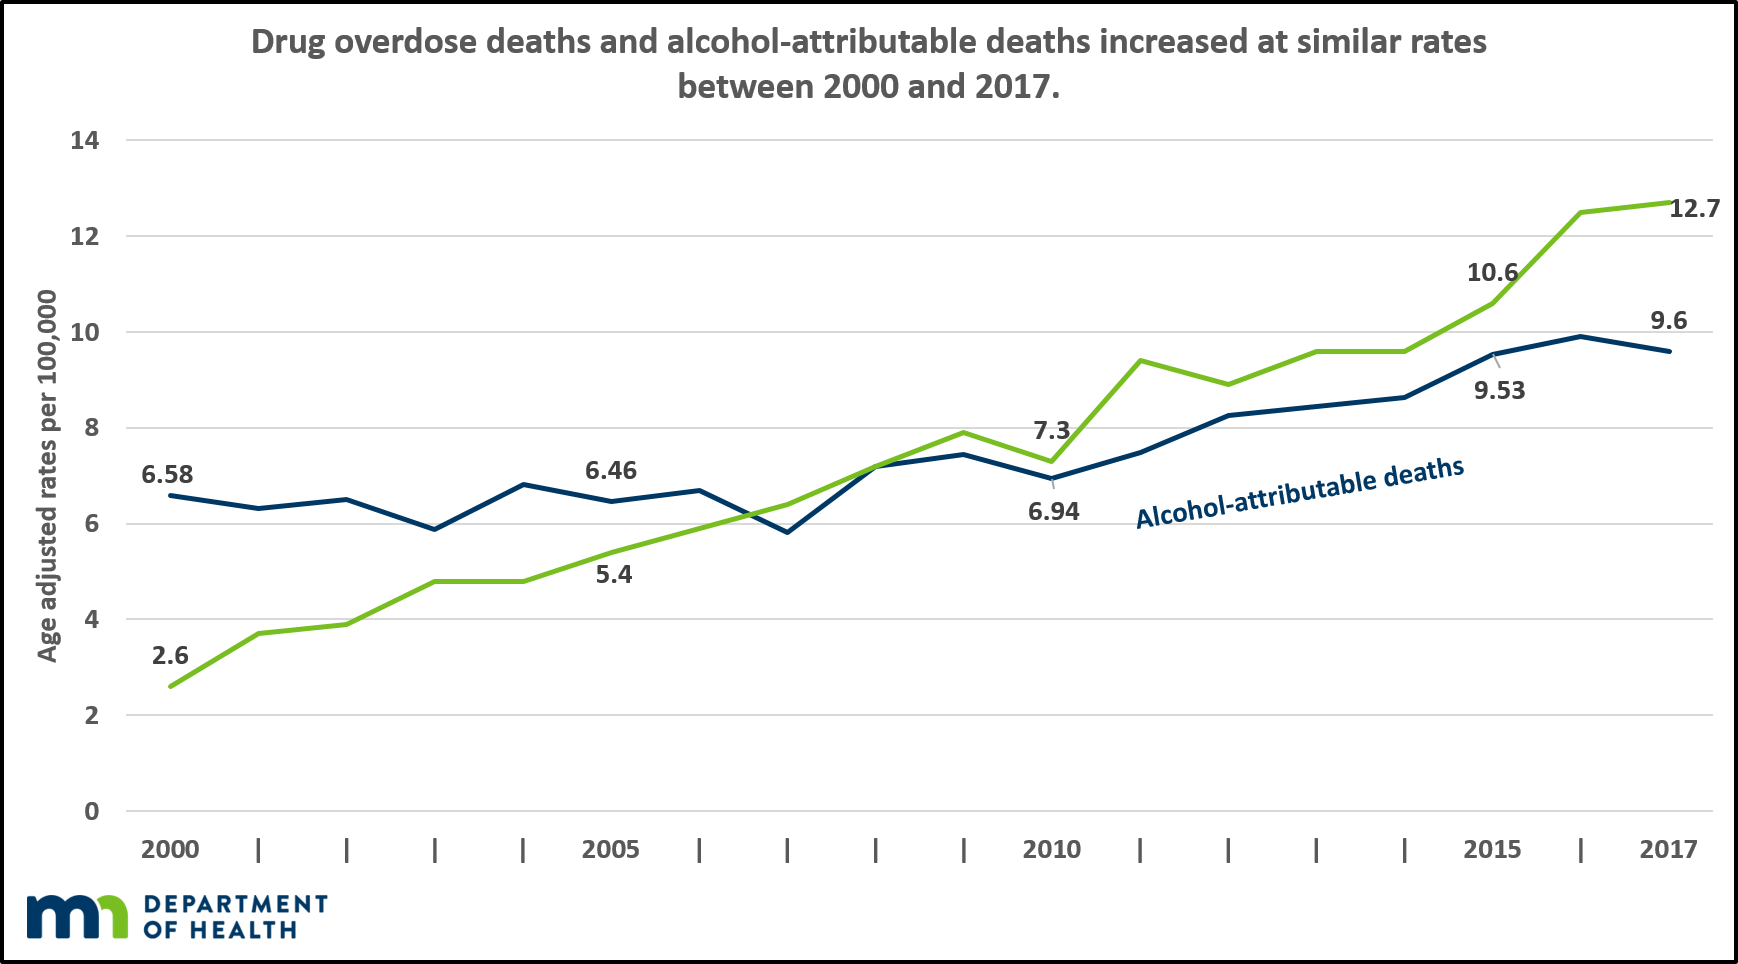 Deaths from drugs and alcohol increased at similar rates from 2000 to 2017